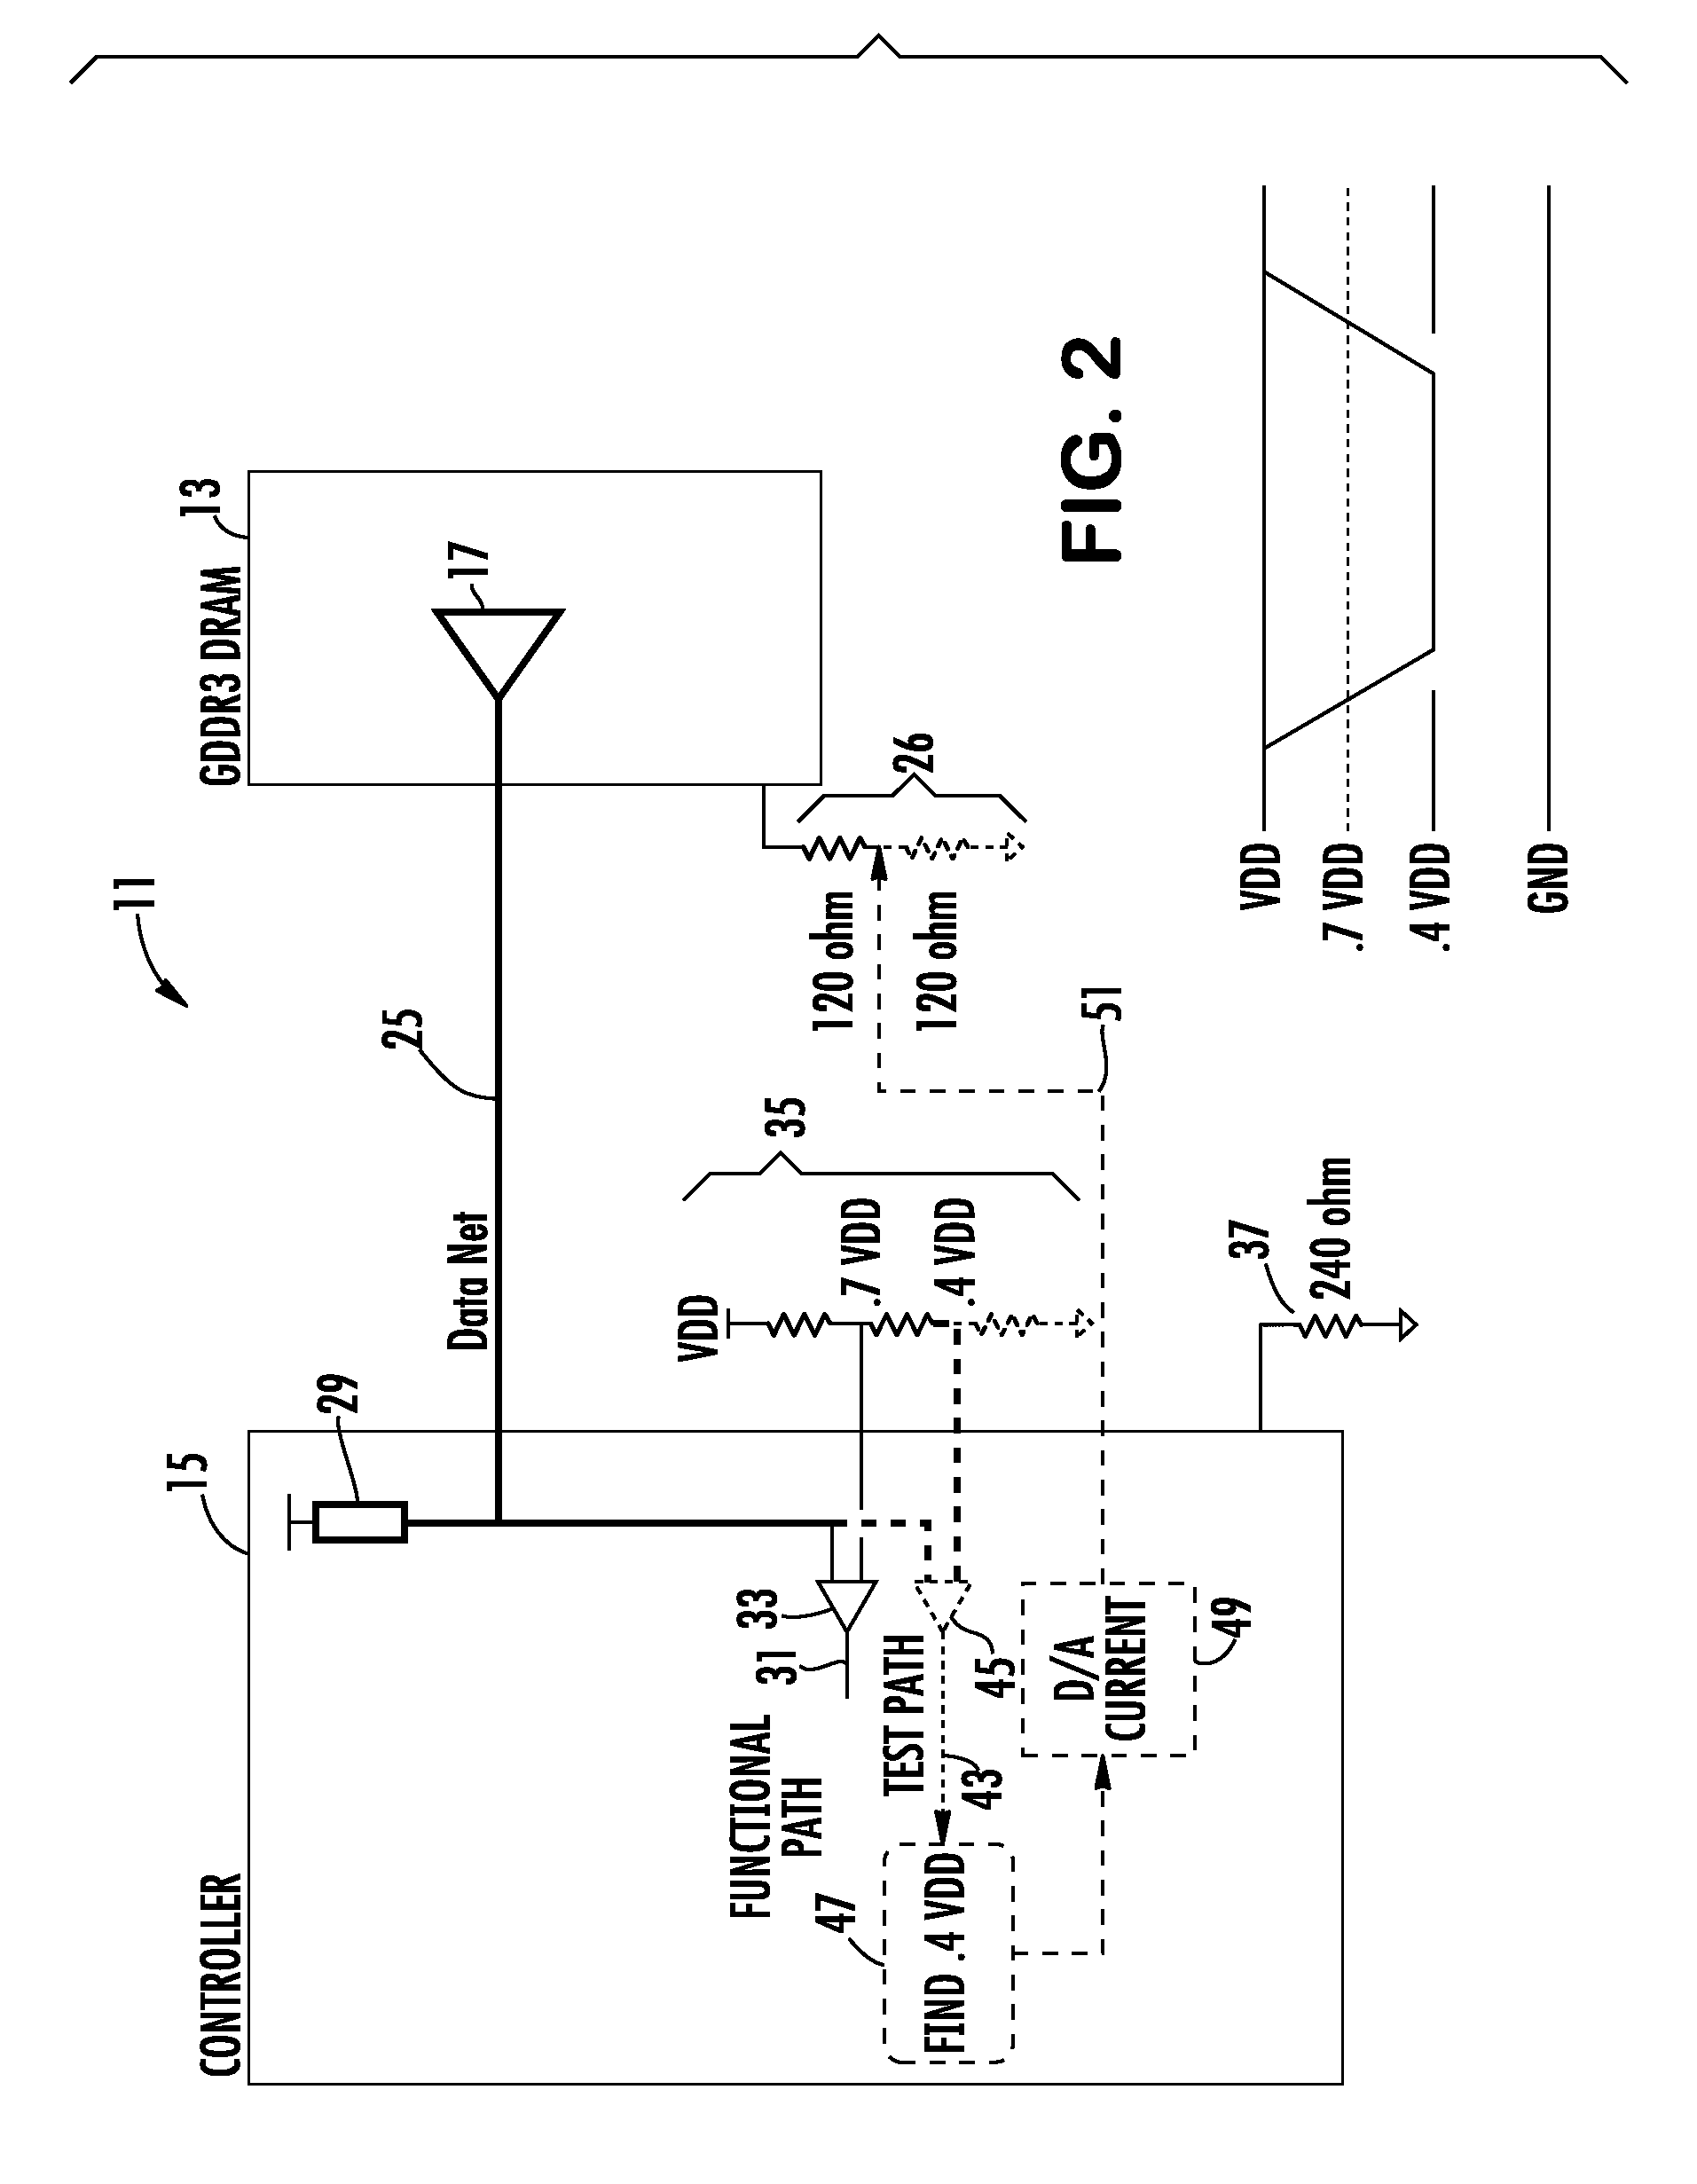 Calibration of Memory Driver With Offset in a Memory Controller and Memory Device Interface in a Communication Bus